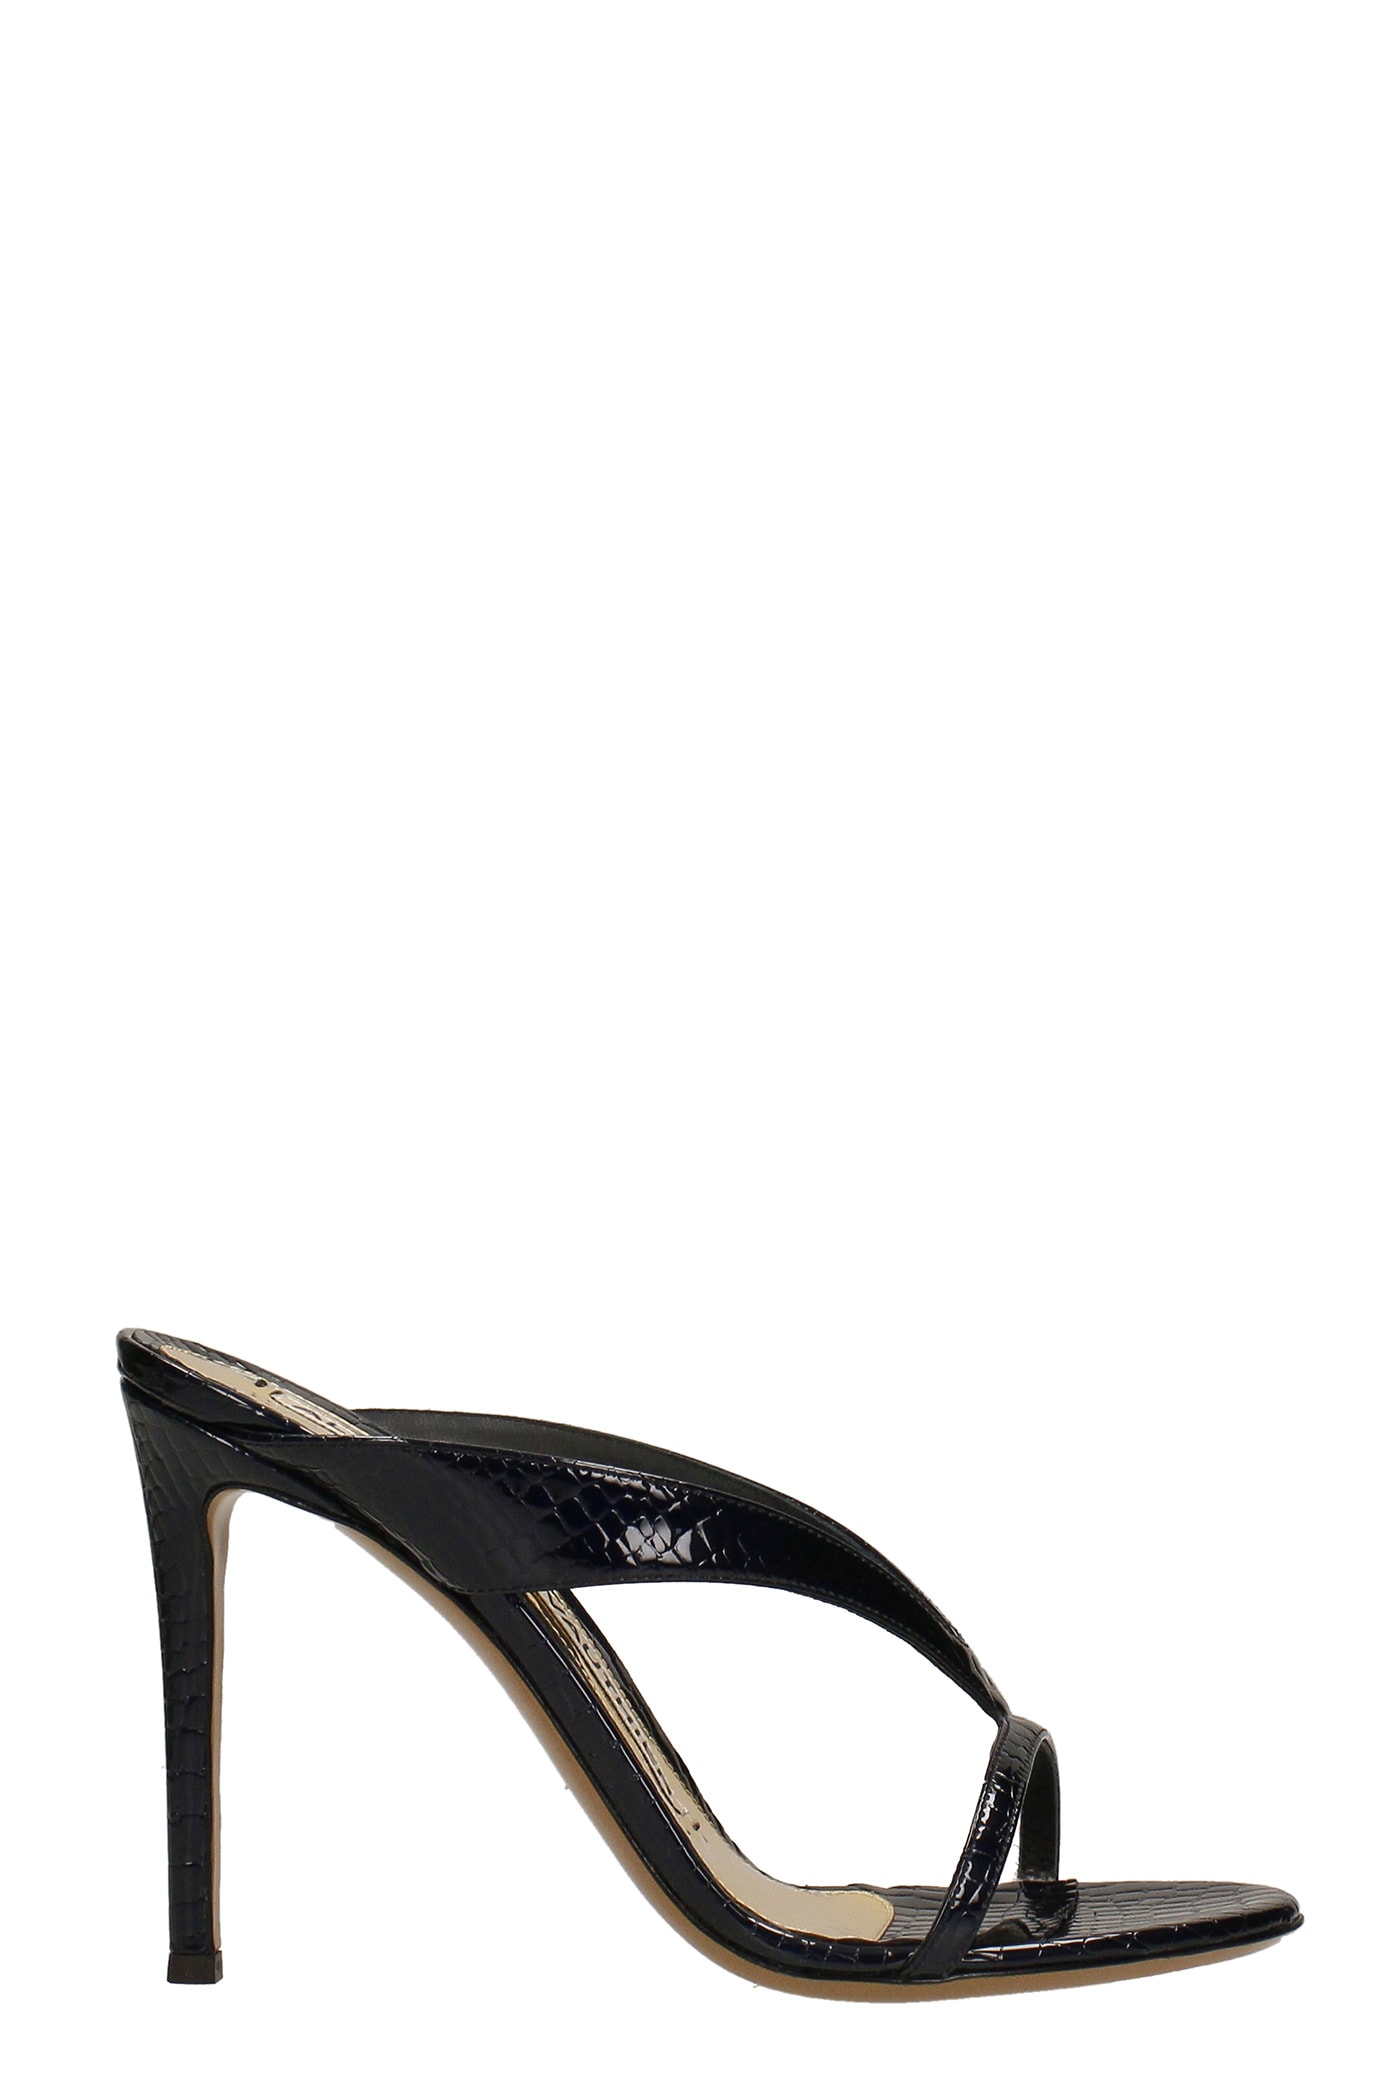 Alexandre Vauthier Sandals In Black Leather